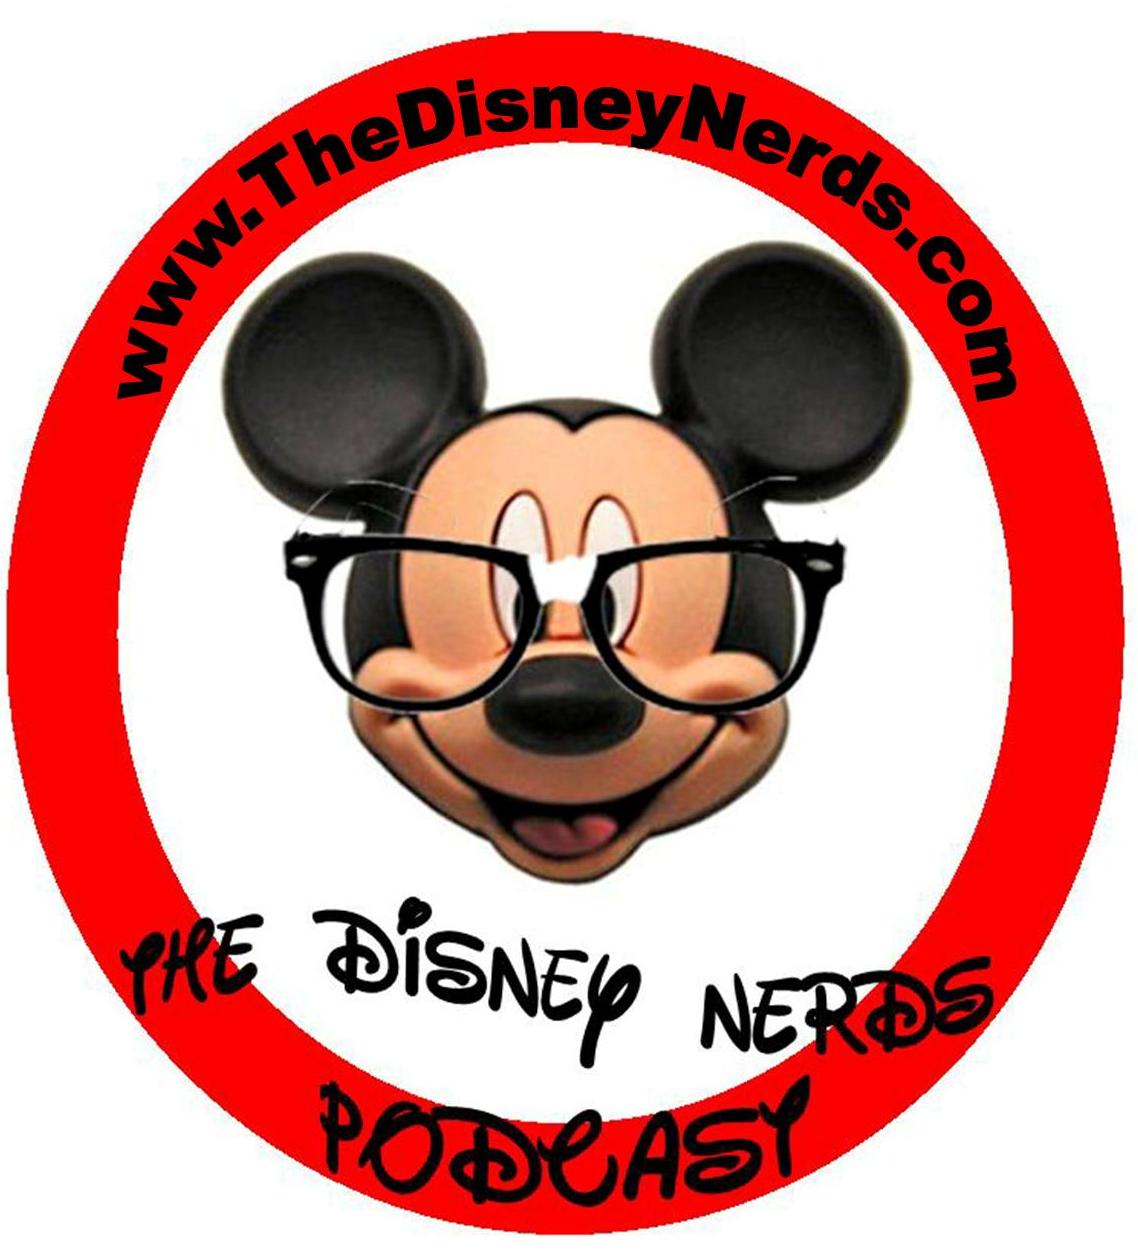 Show # 36 of the Disney Nerds Podcast